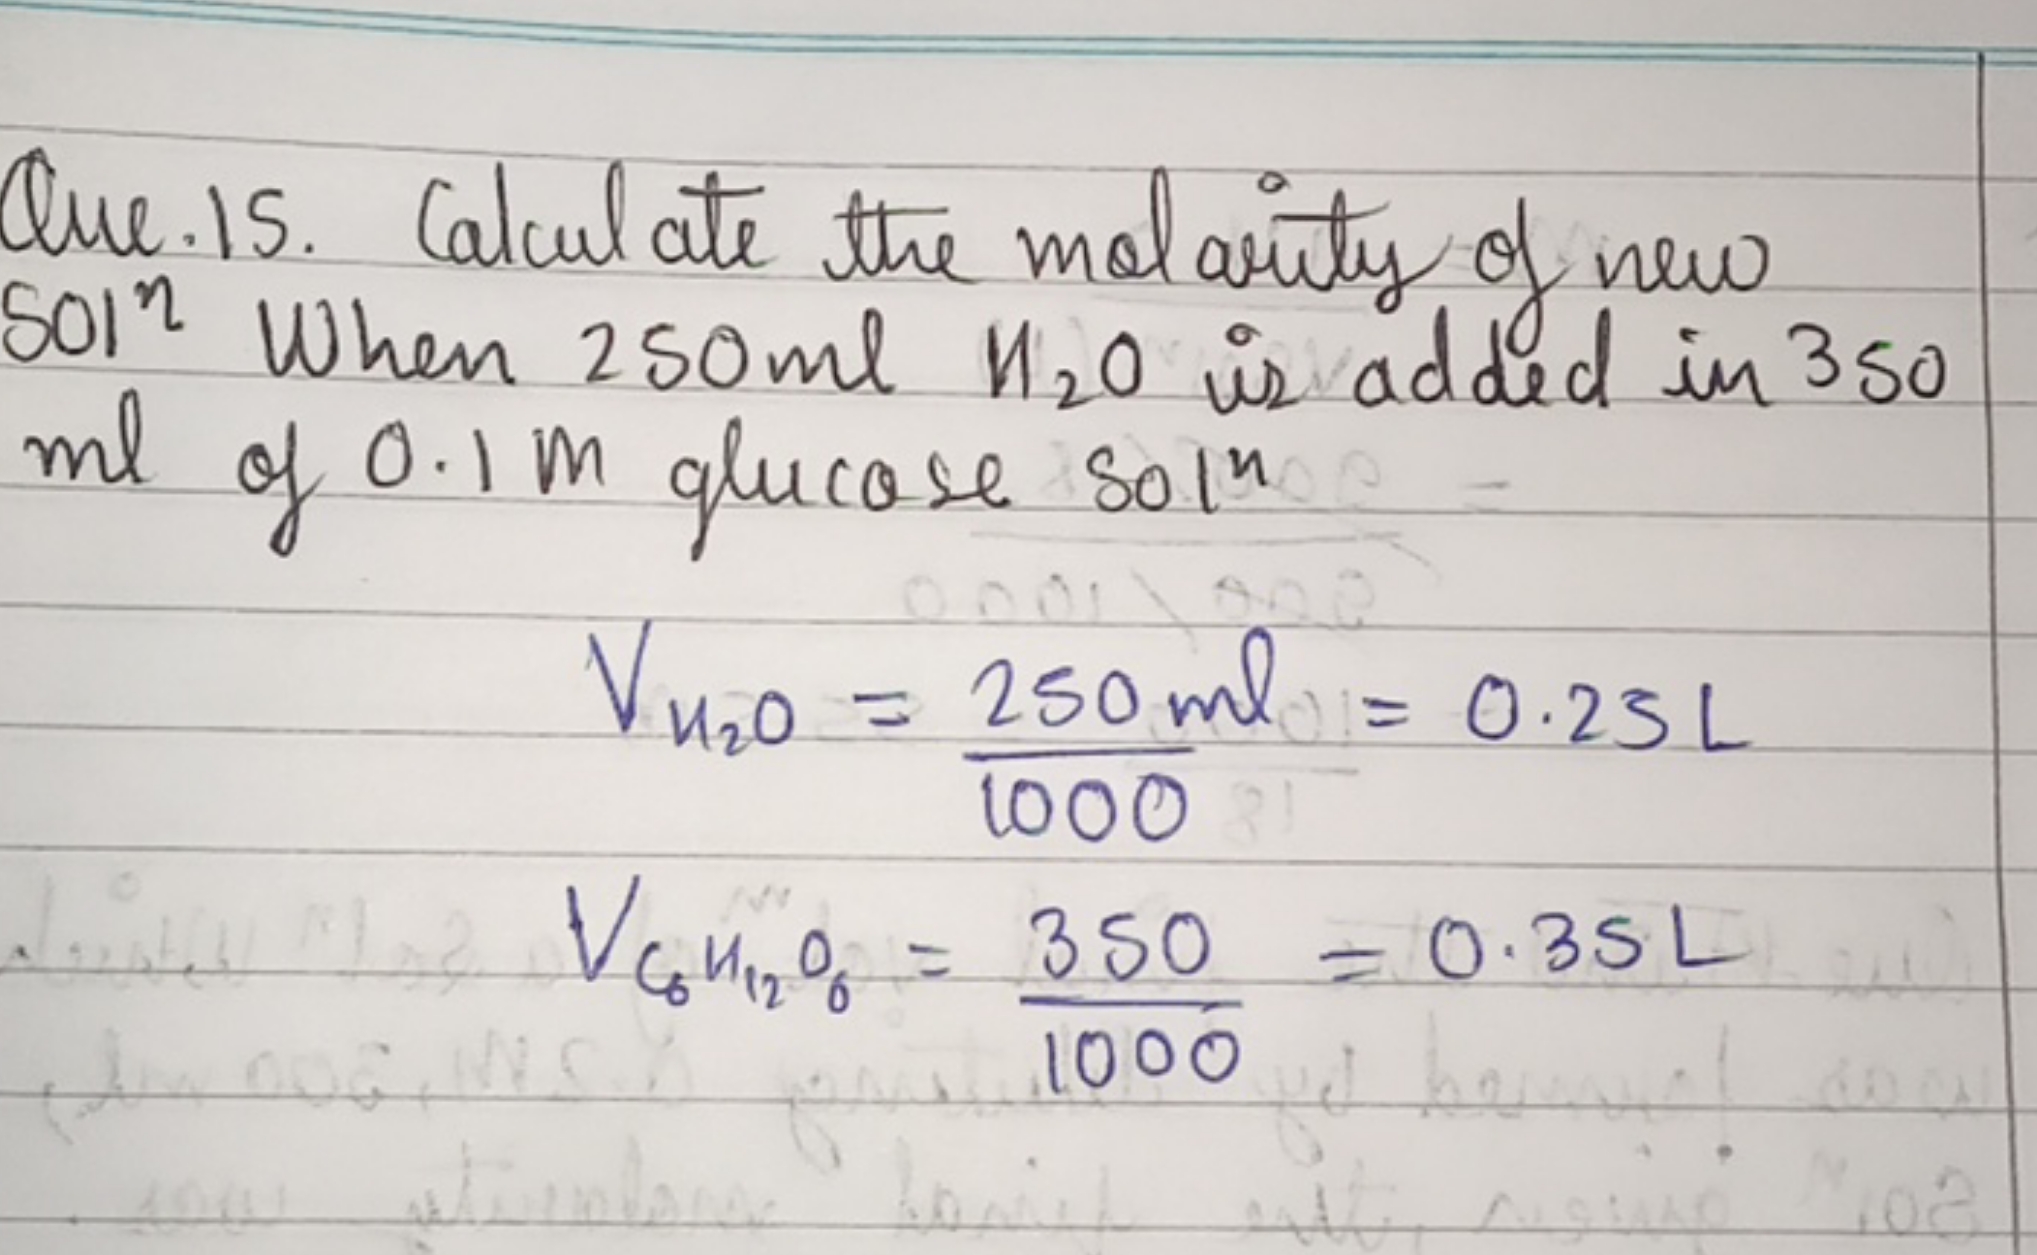 Que. 15. Calculate the molarity of new SOIn When 250mlH2​O ir added in